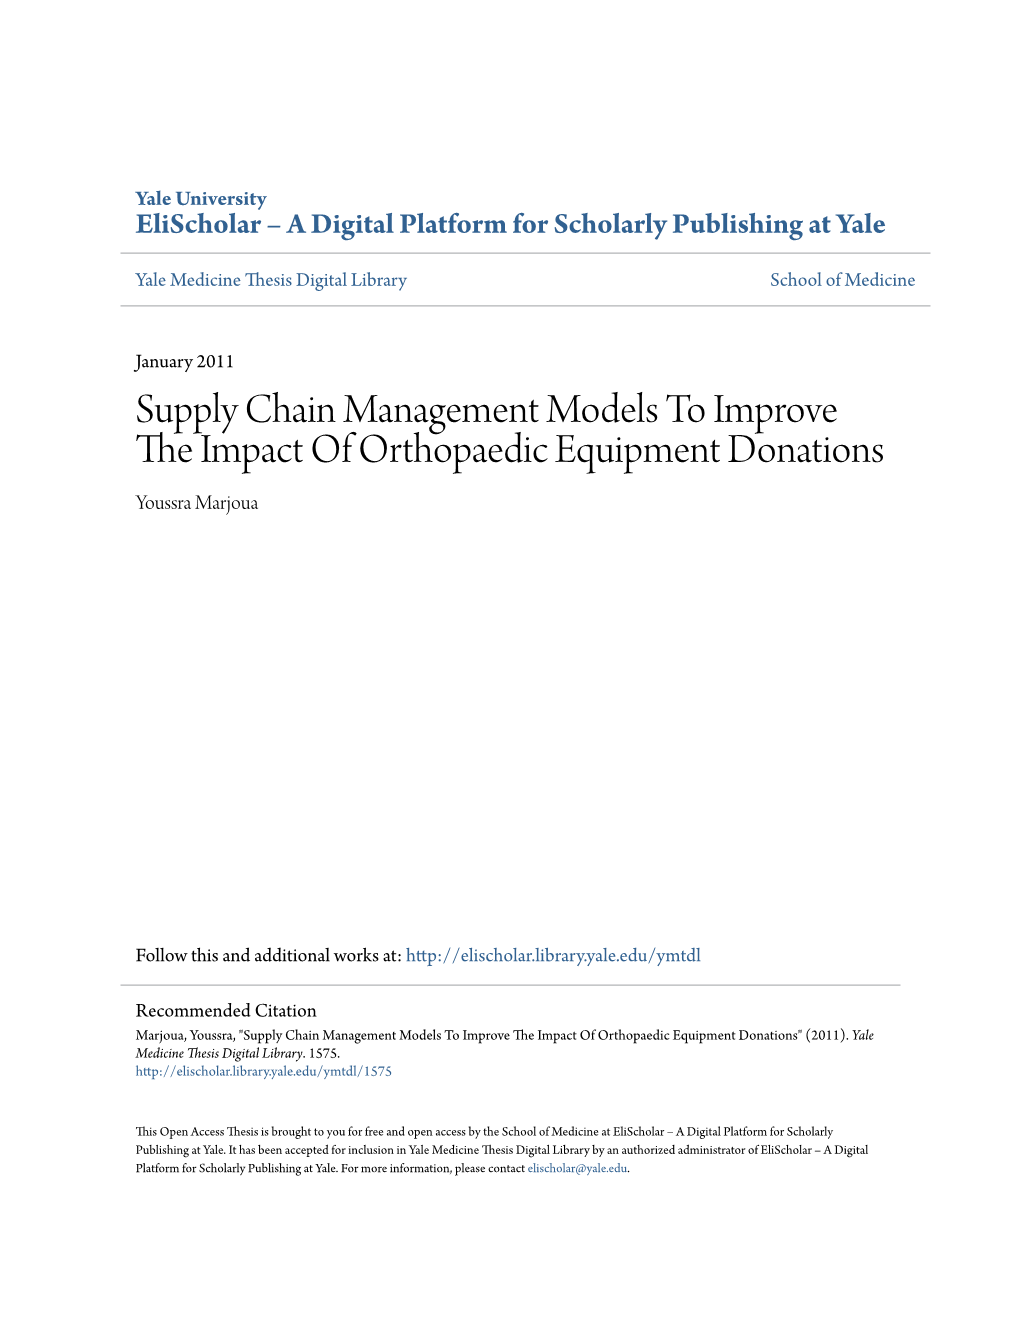 Supply Chain Management Models to Improve the Impact of Orthopaedic Equipment Donations